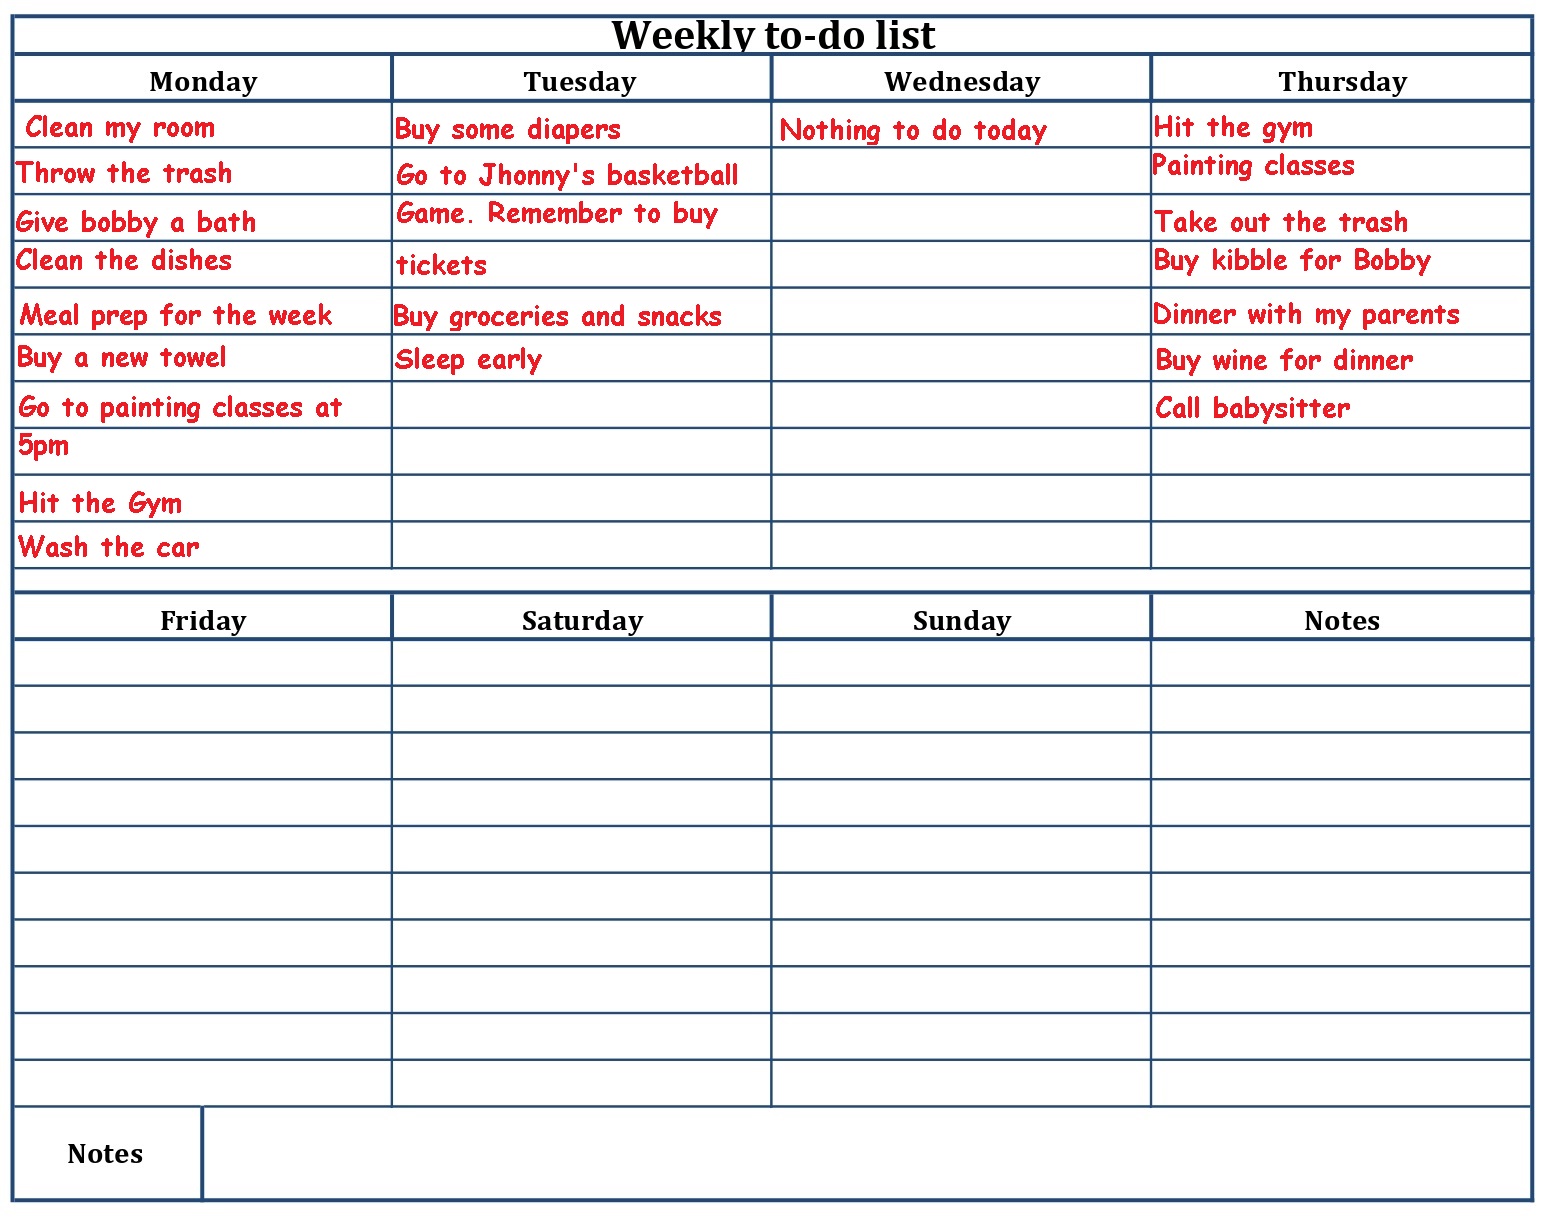 weekly to-do list example